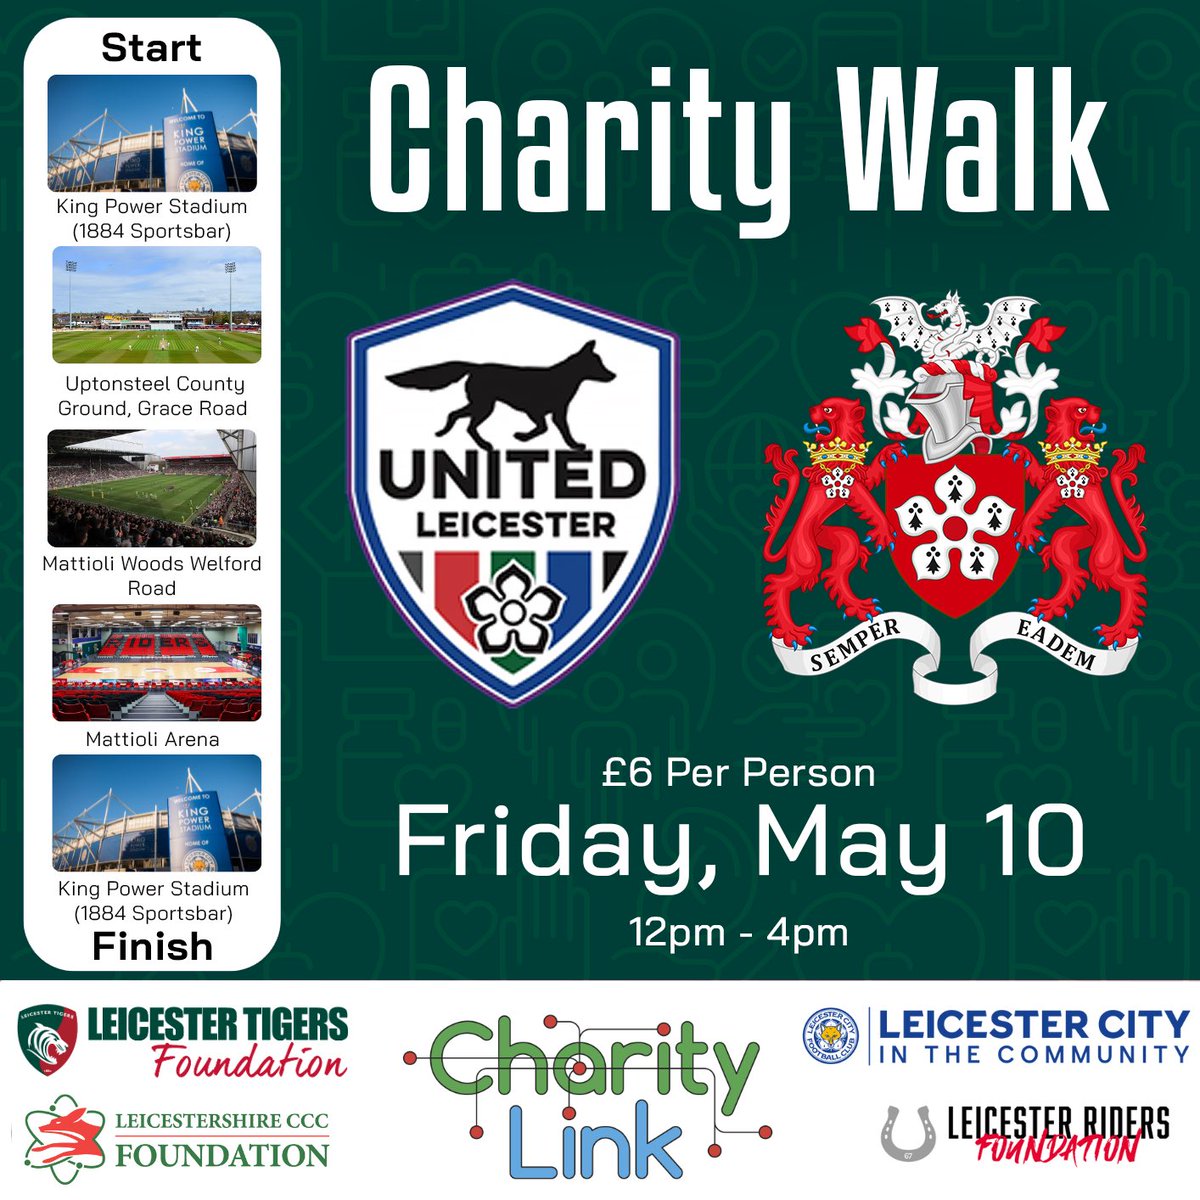 Please join United Leicester’s charity walk on behalf of the Lord Mayor of Leicester, Cllr Dr Susan Barton! All funds raised will be donated to Charity Link, who provide support to those in need of the basics to ensure they are warm, safe and fed. charity-link.org/product/stadiu…